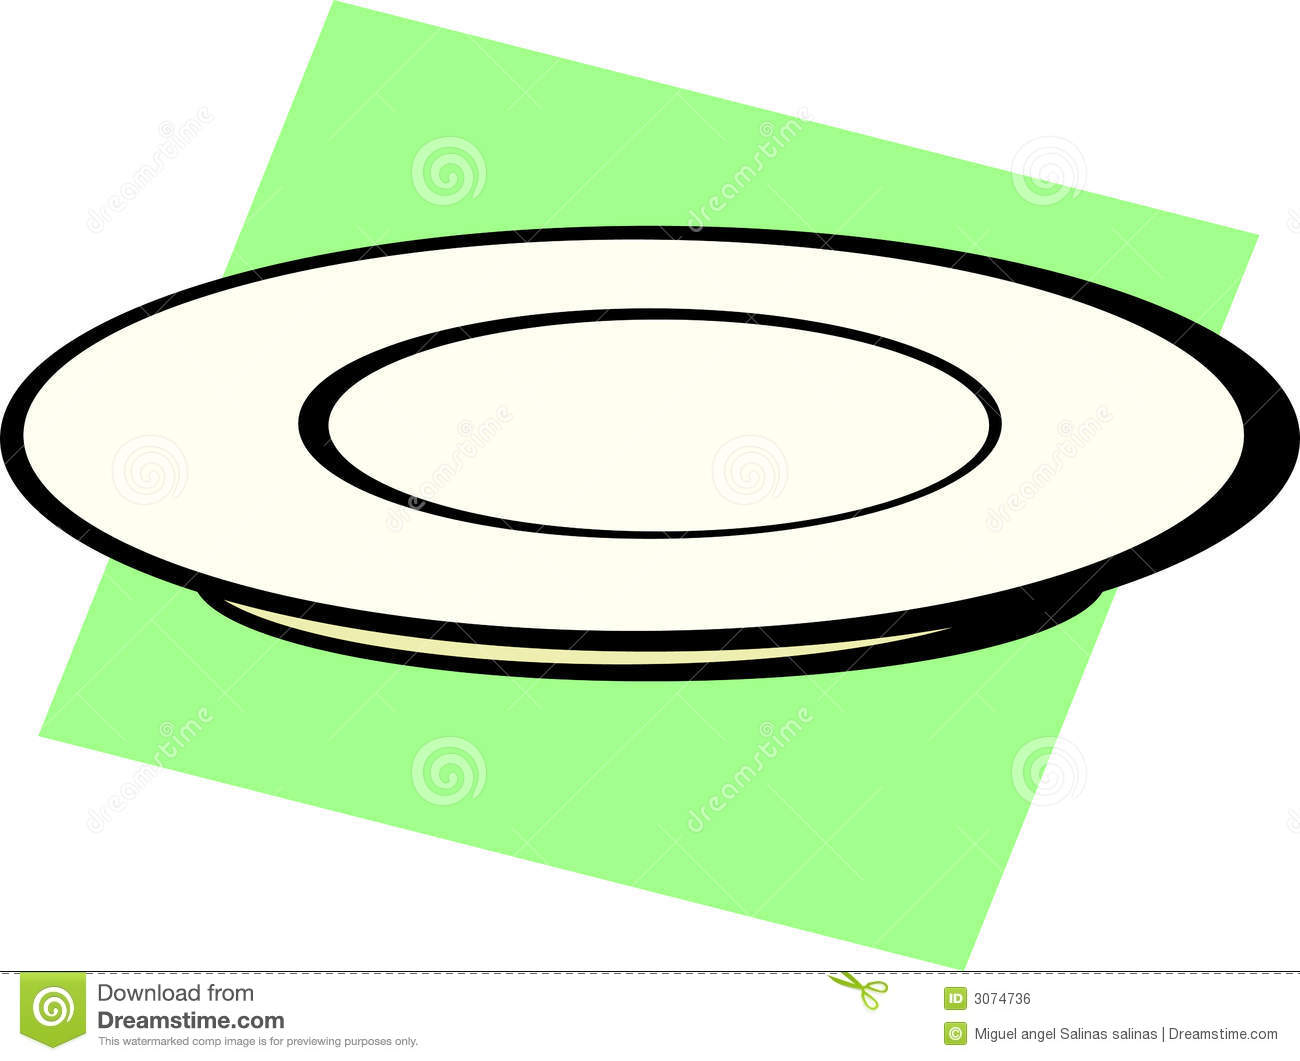 Dish Or Plate Vector Illustration Royalty Free Stock Image   Image